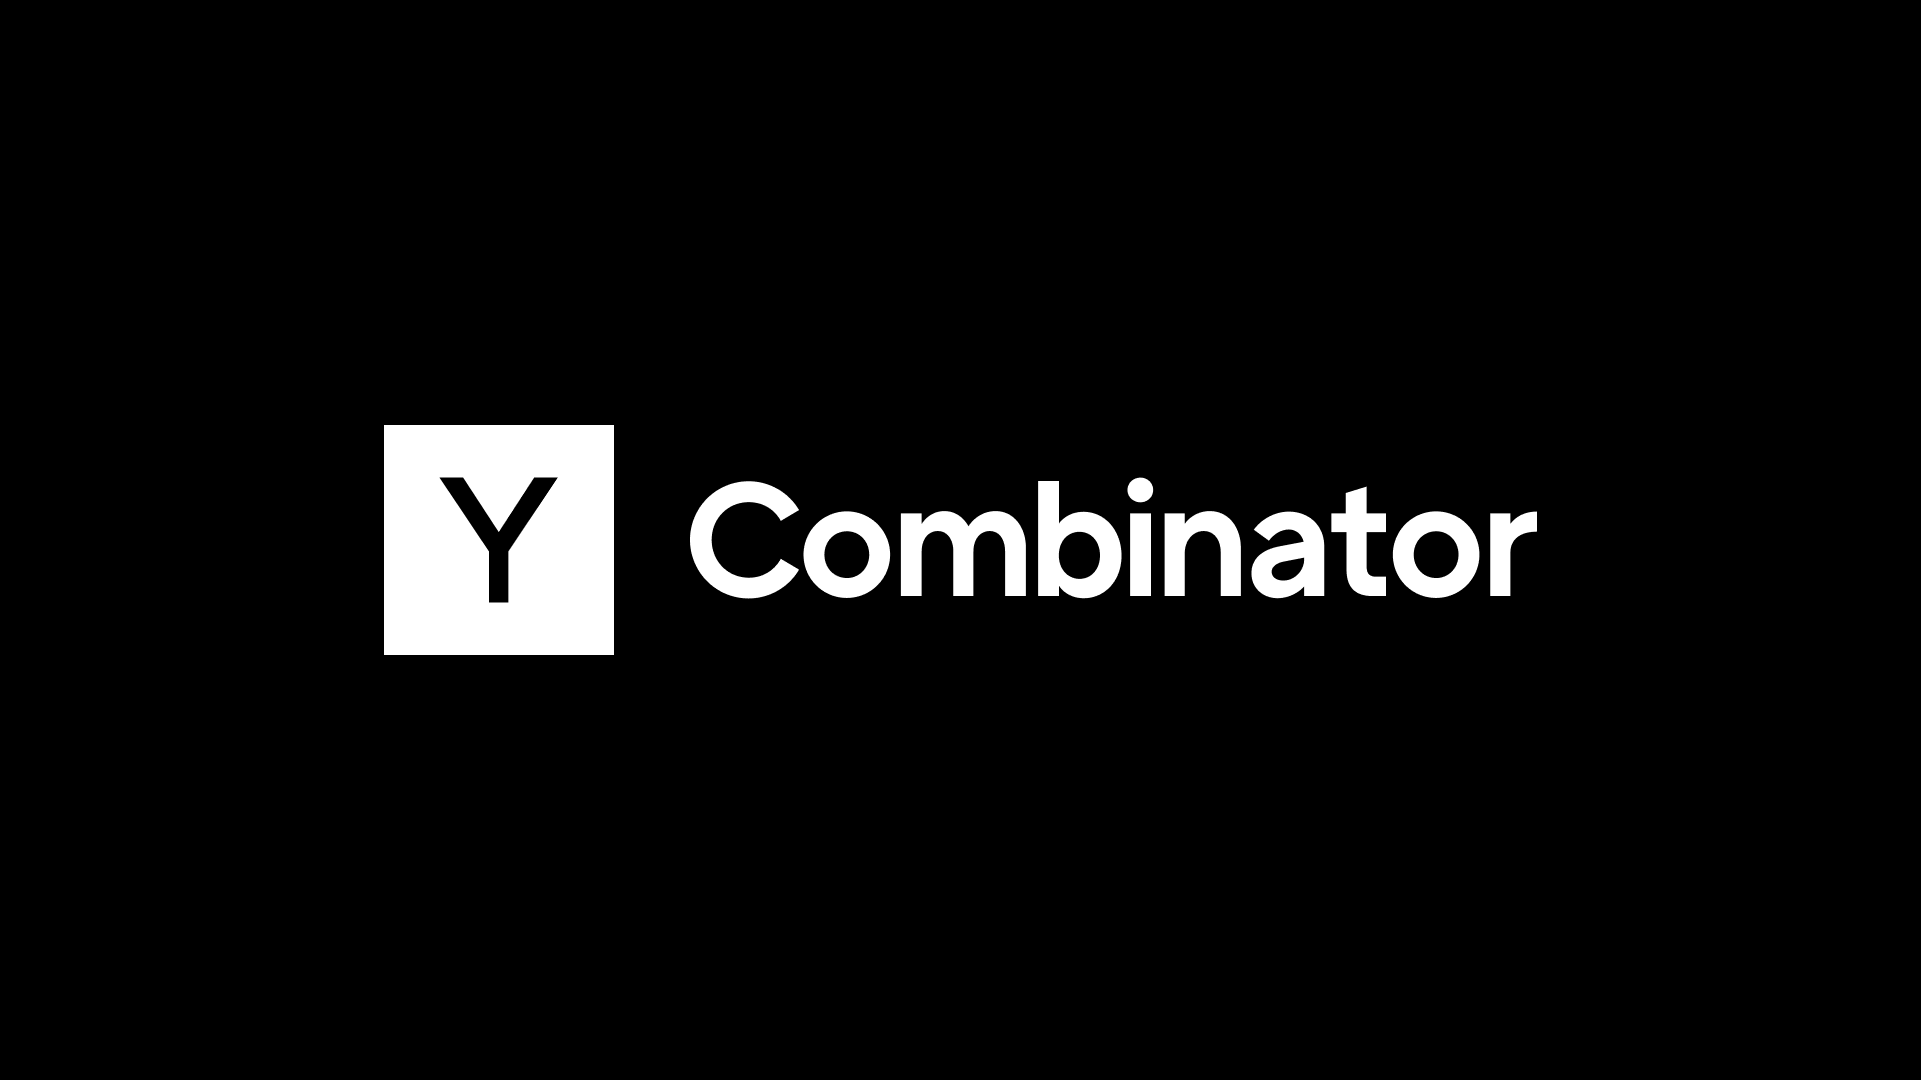 Y Combinator's Winter 2023 Cybersecurity, Privacy, and Trust Startups